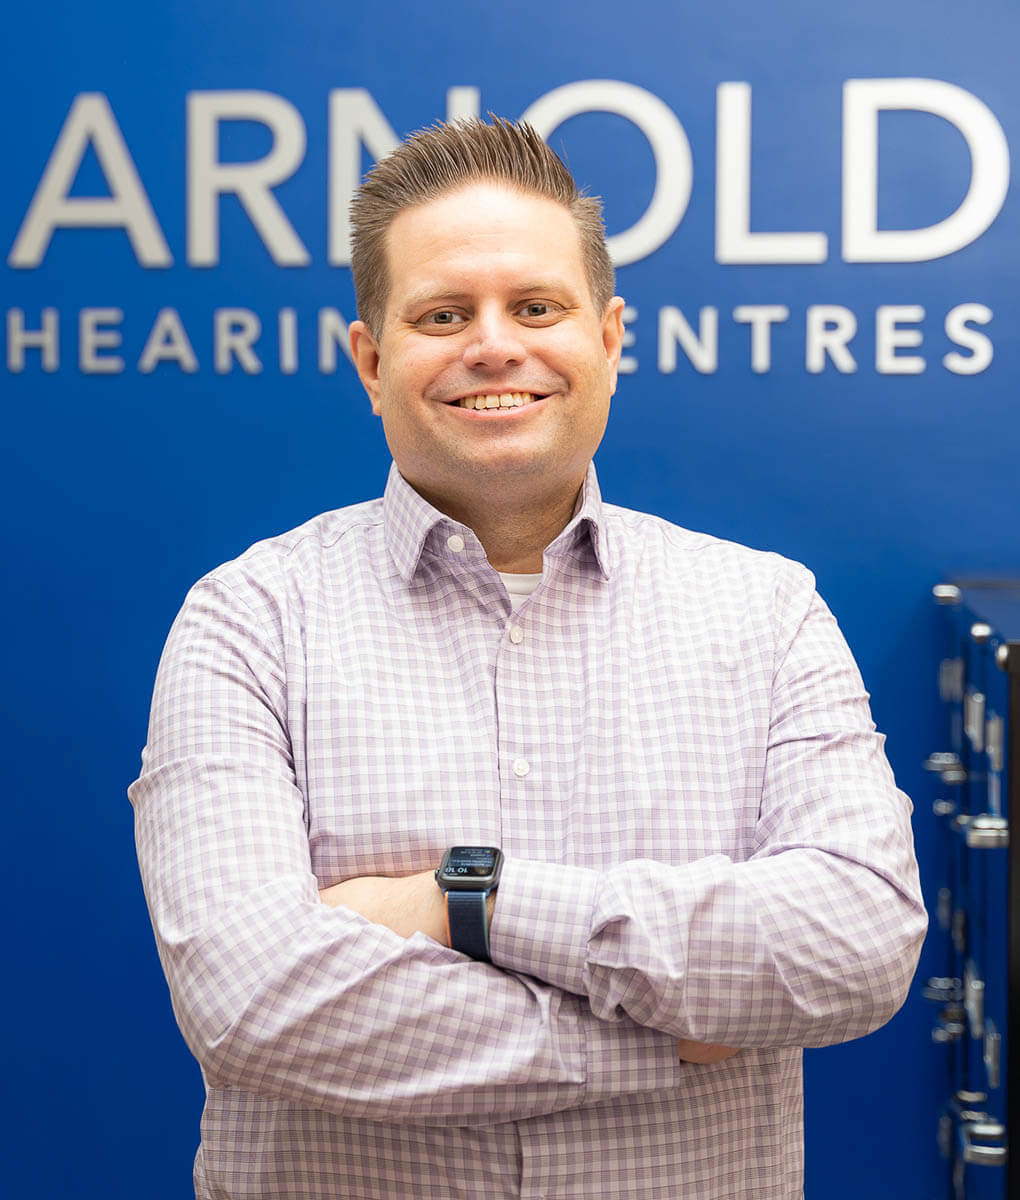 Chris Arnold, HIS & Owner of Arnold Hearing Centres